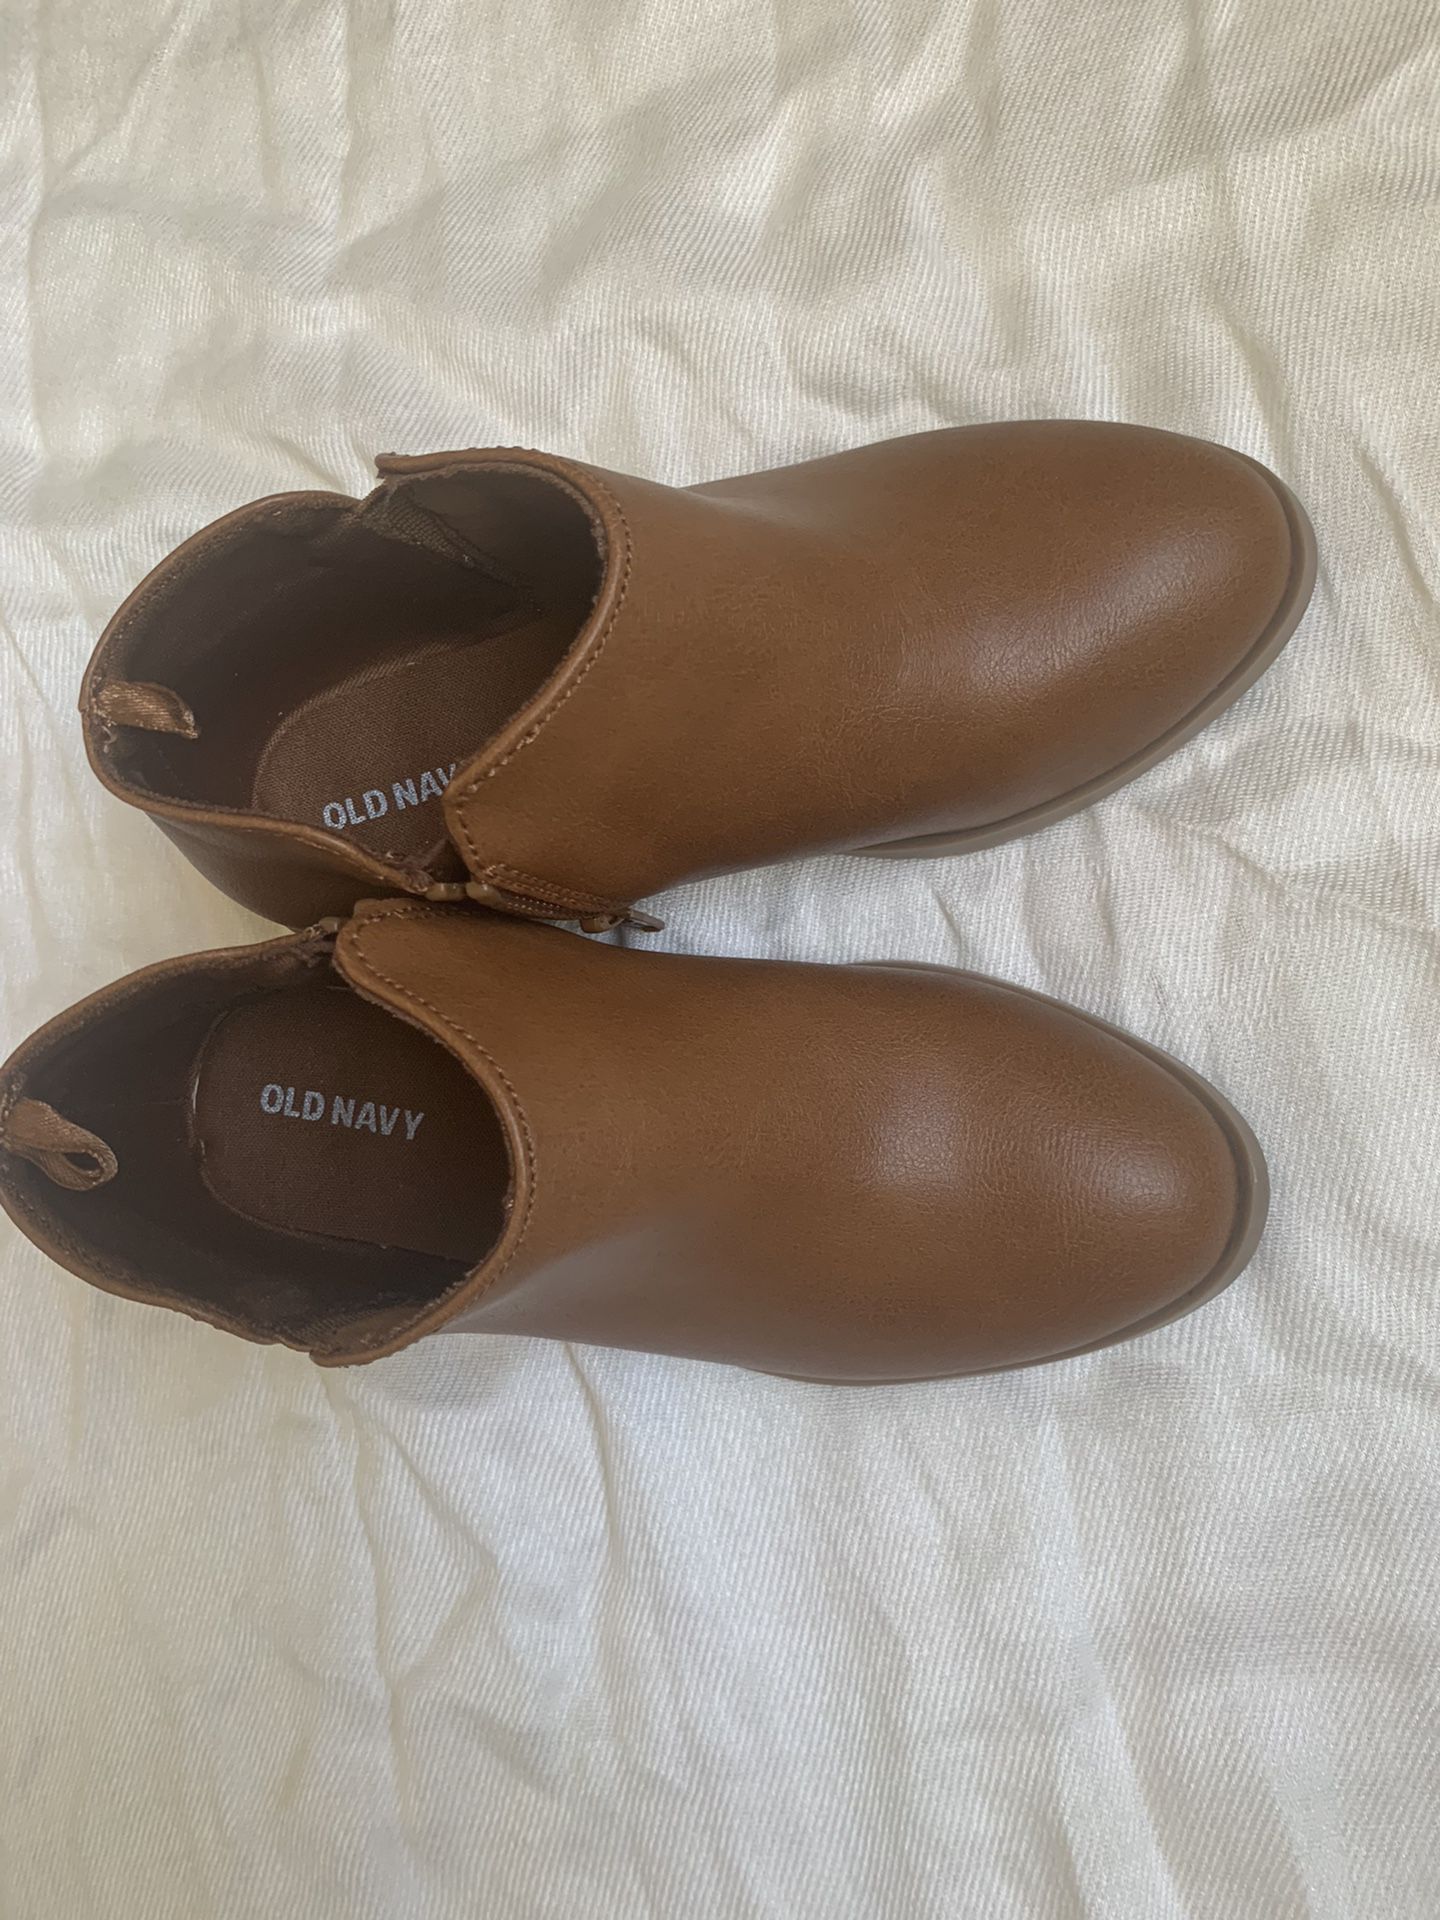 Old navy - Brown Boots For Girl, Size 11